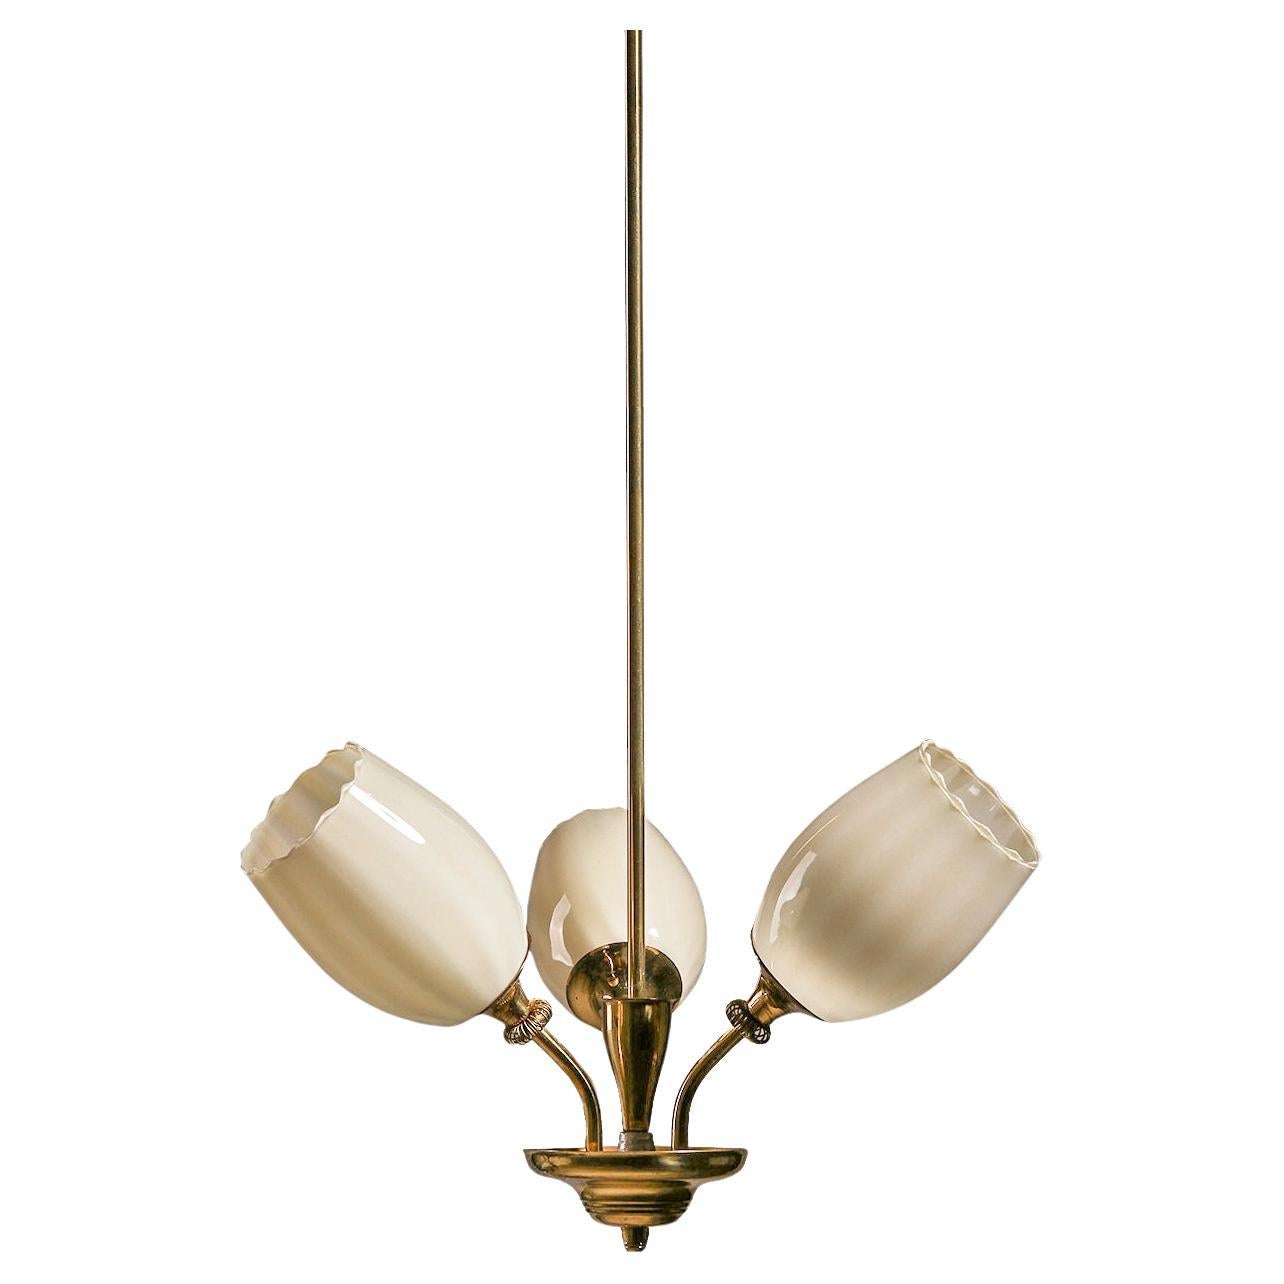 Itsu Oy "ER 5103/3" Pendant Lamp in Brass and Opaline Glass, Finland, 1950s